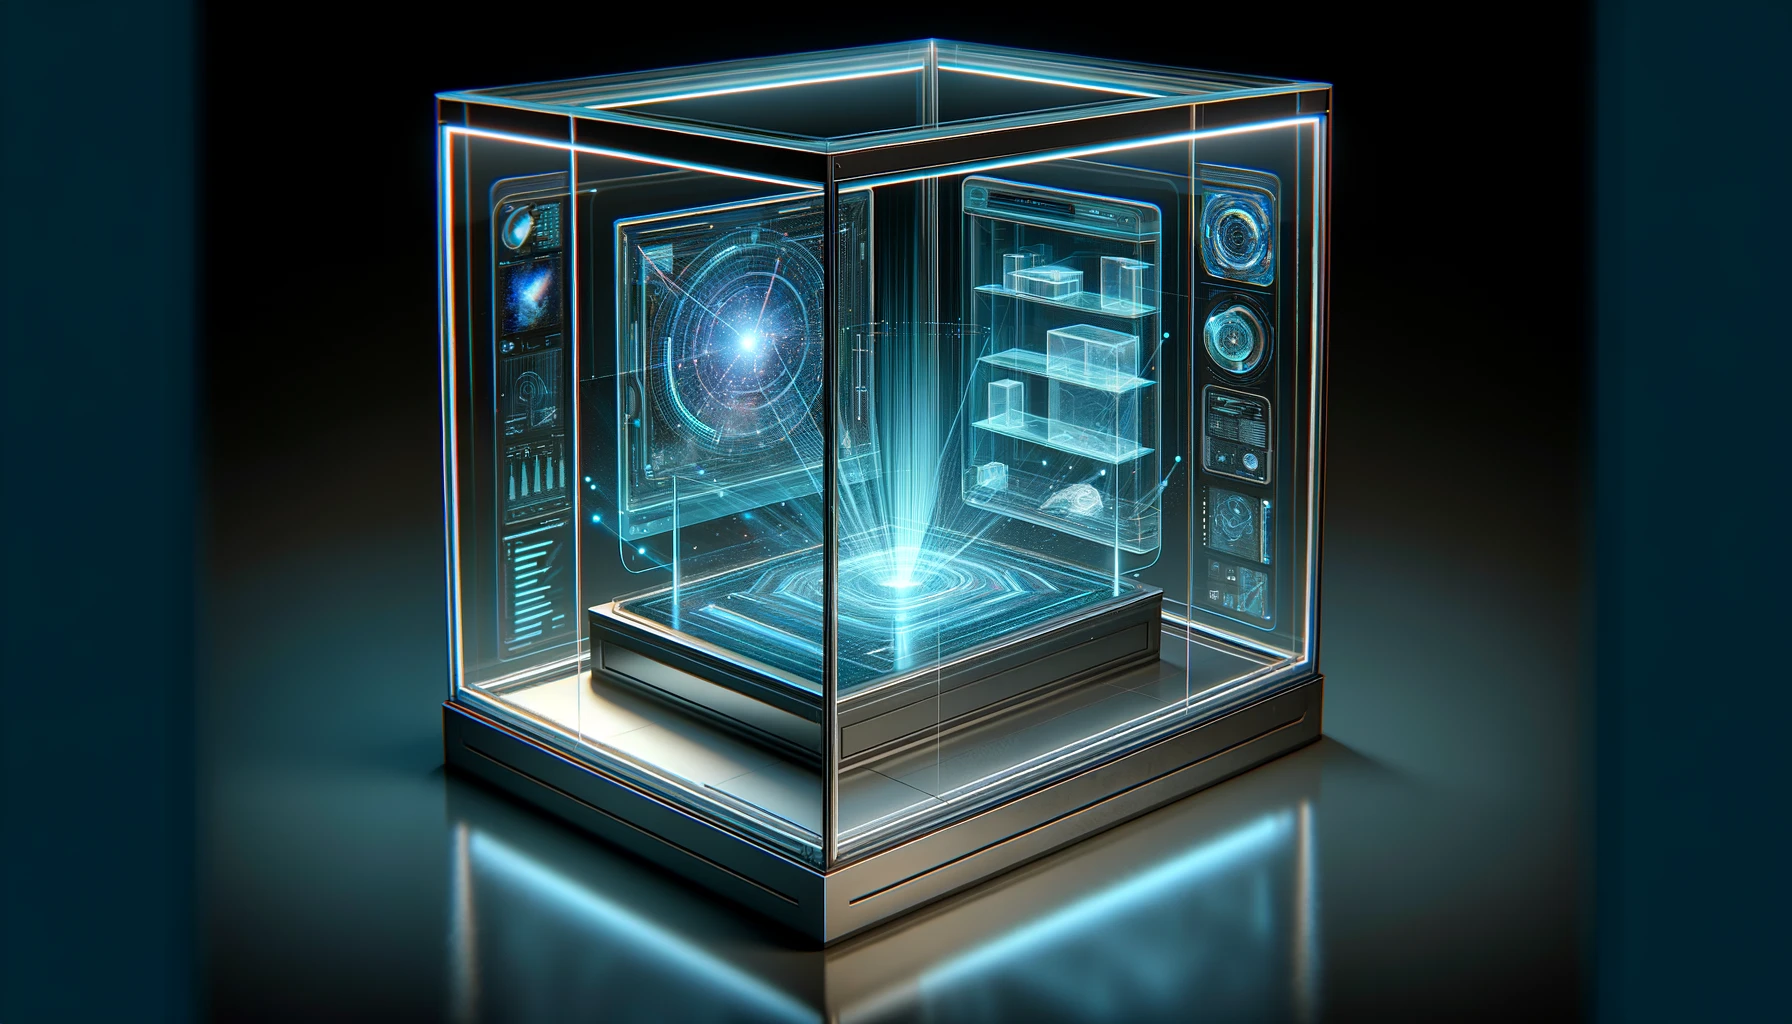 3D holographic display cabinets with advanced software